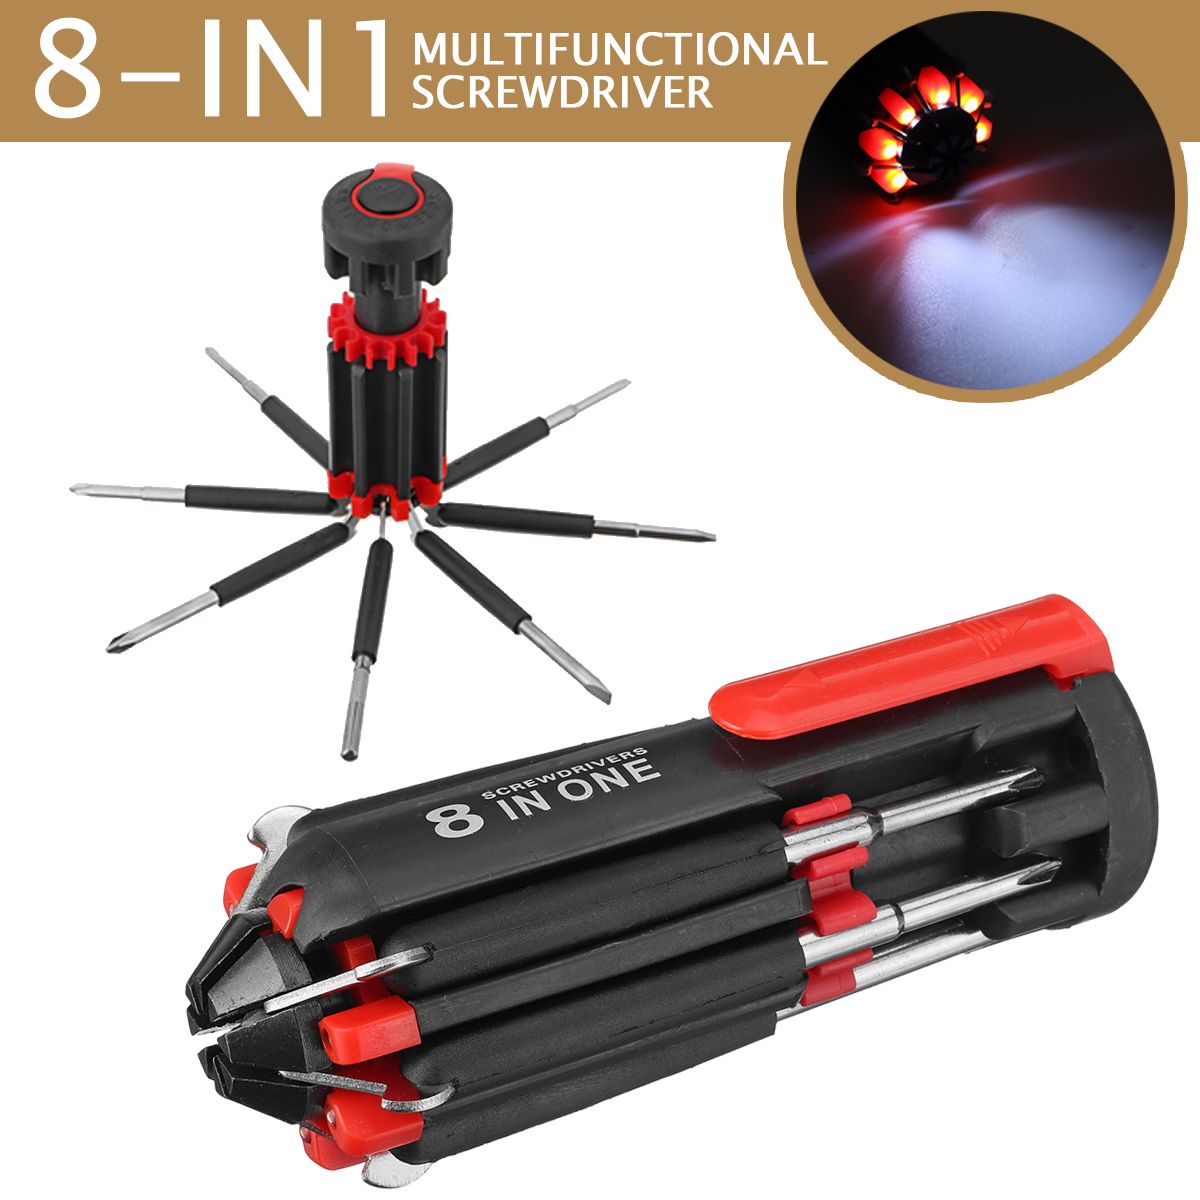 8-in-1-Multifunctional-Screwdriver-Cellphones-Watches-Home-Appliances-Repair-Tools-with-Light-1667233